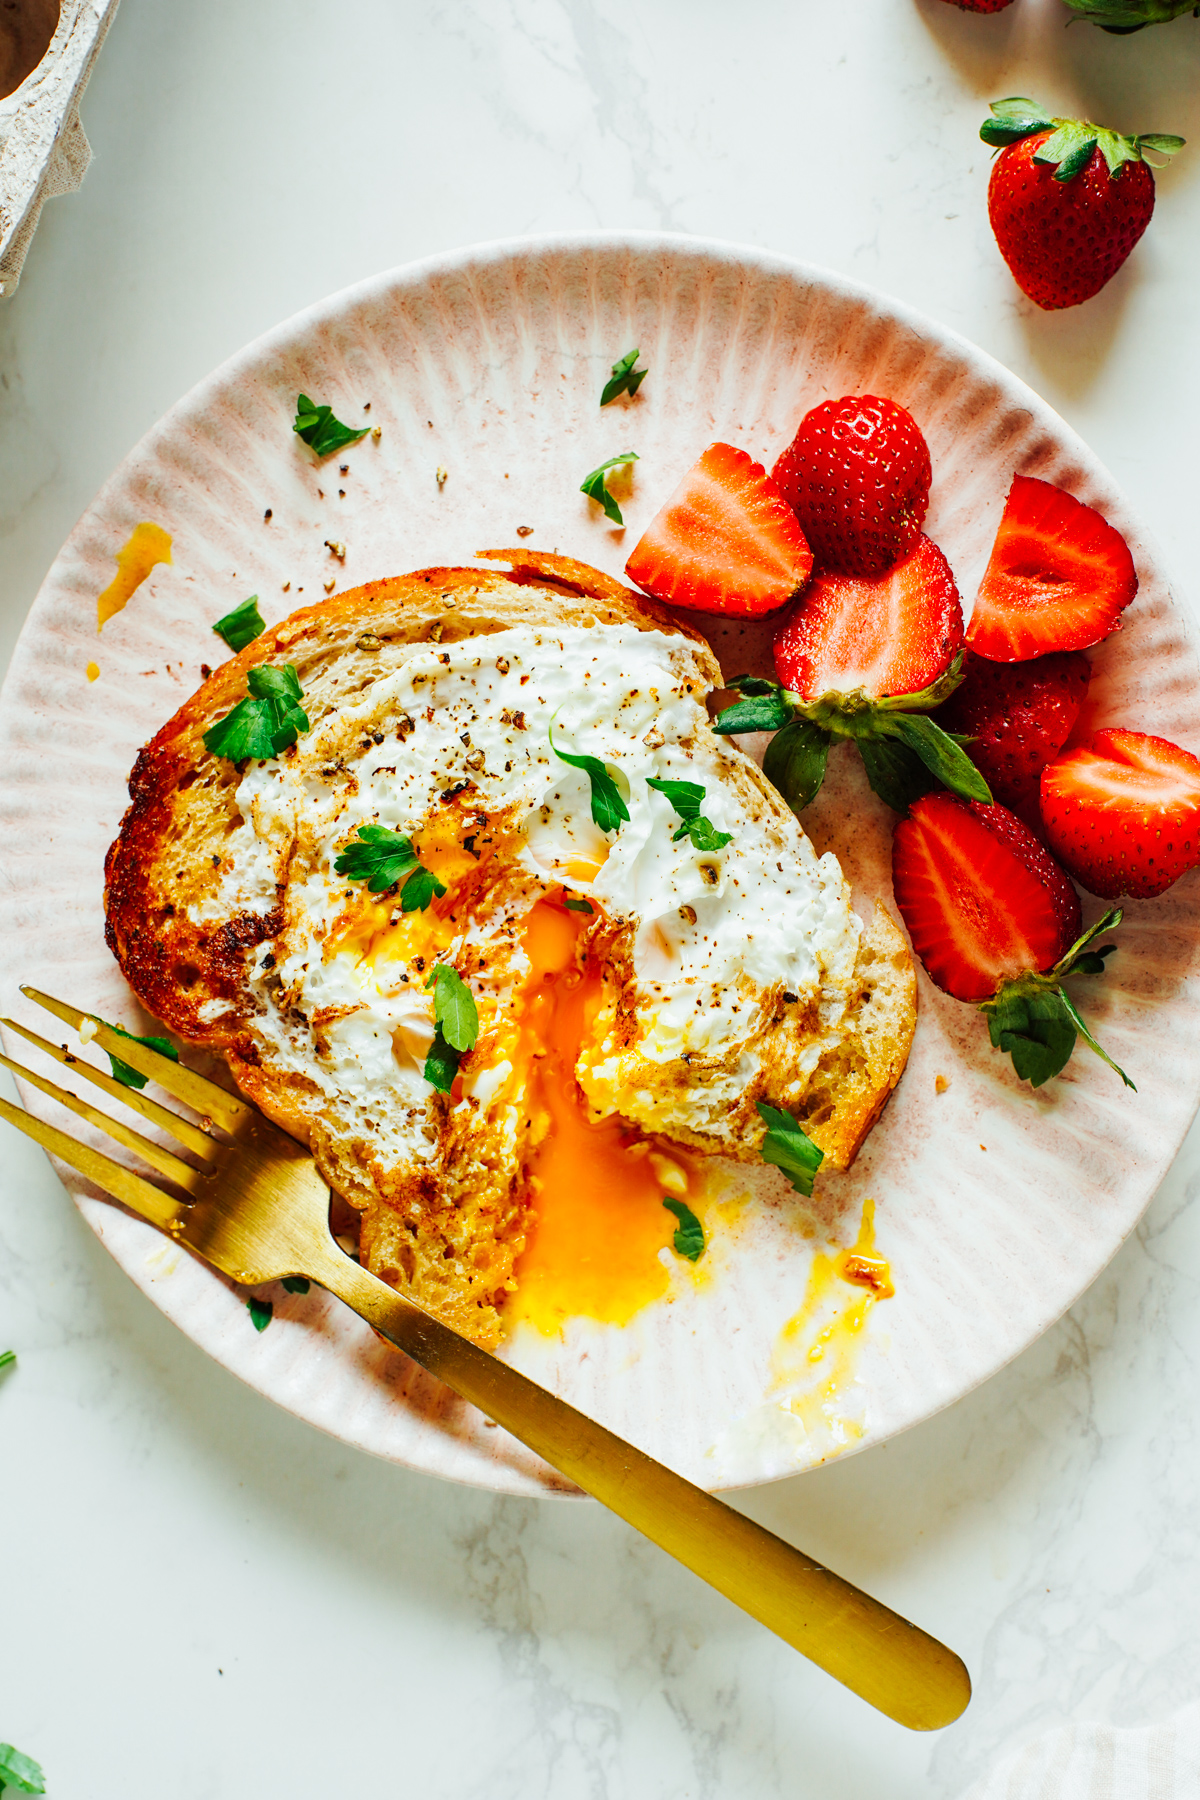 Egg cooked in toast, cracked open with the egg yolk running out on a pink plate with strawberries.